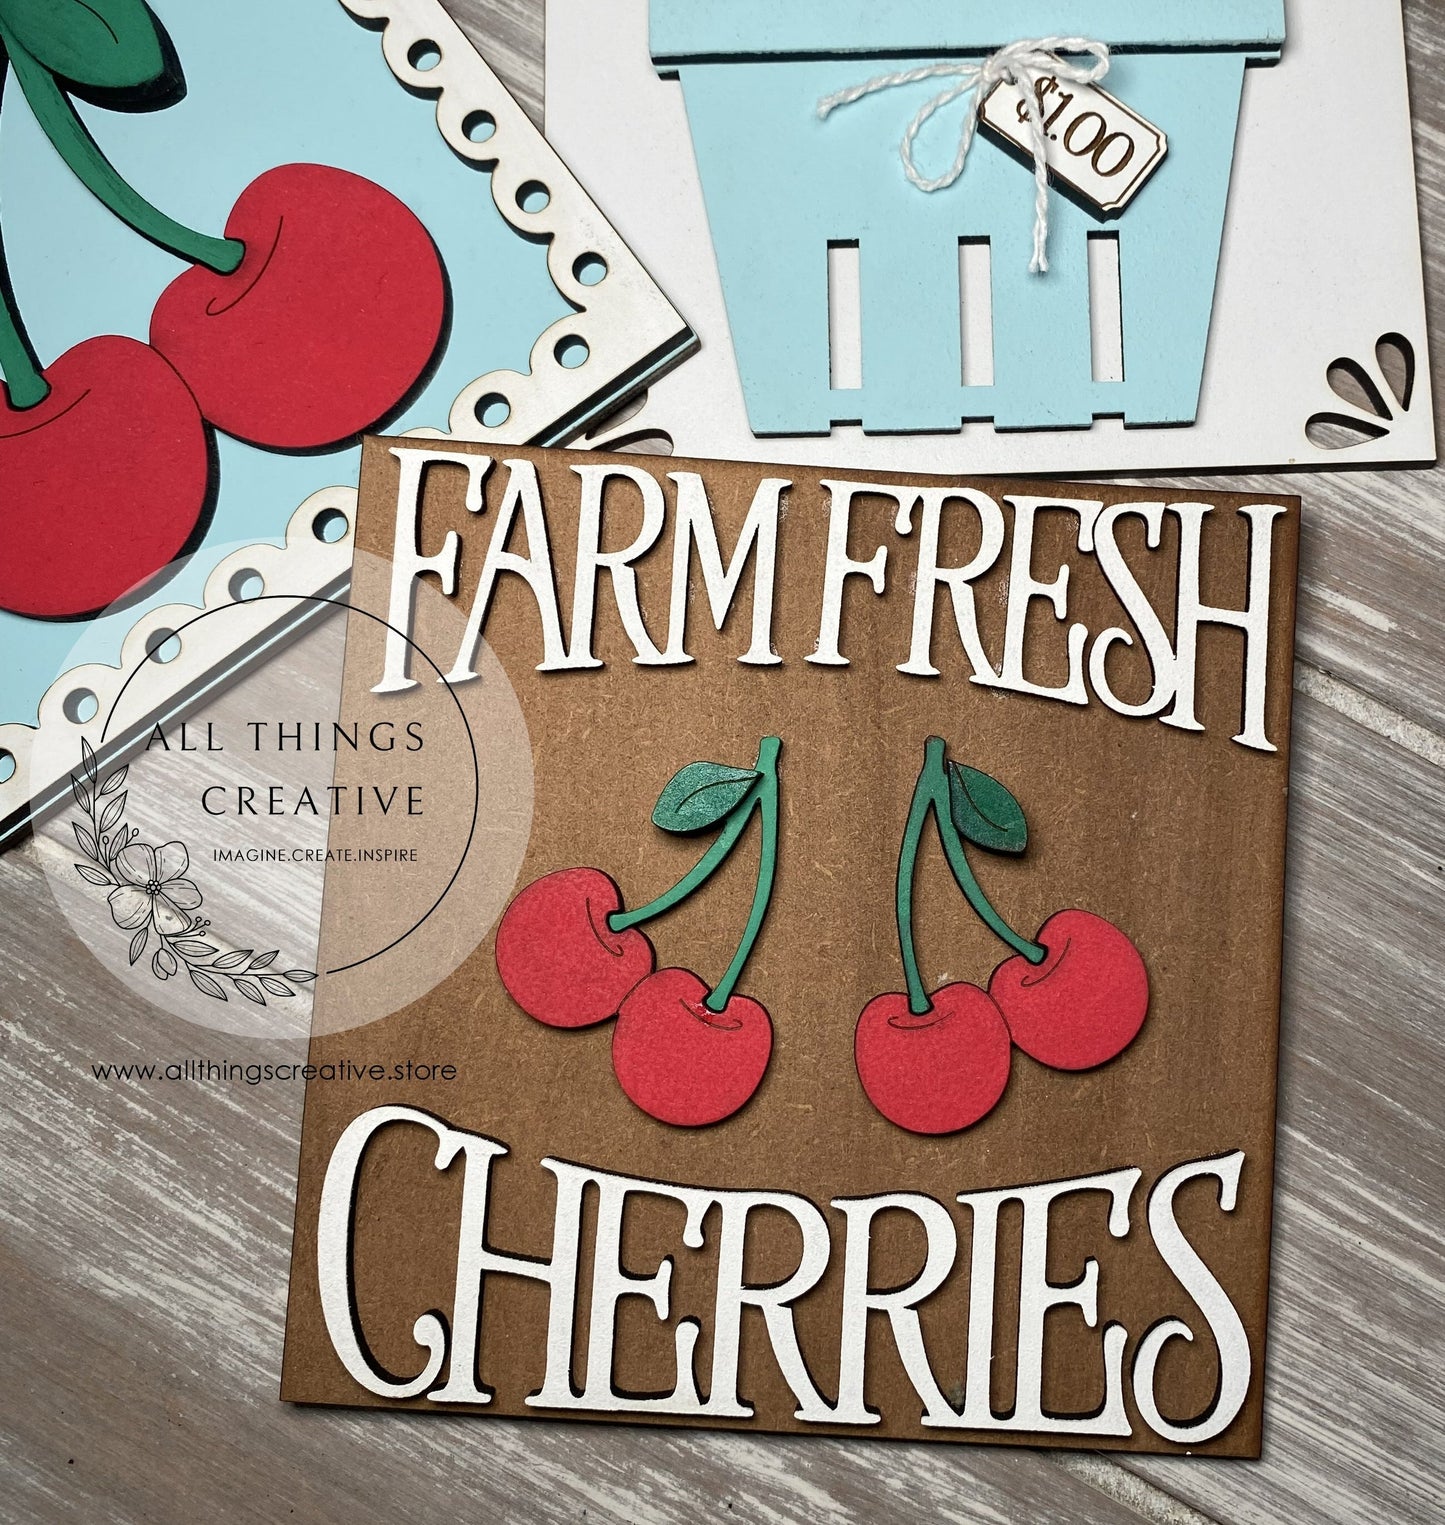 Farm Fresh Cherries Interchangeable Tile Inserts for Leaning Ladder and Home Decor